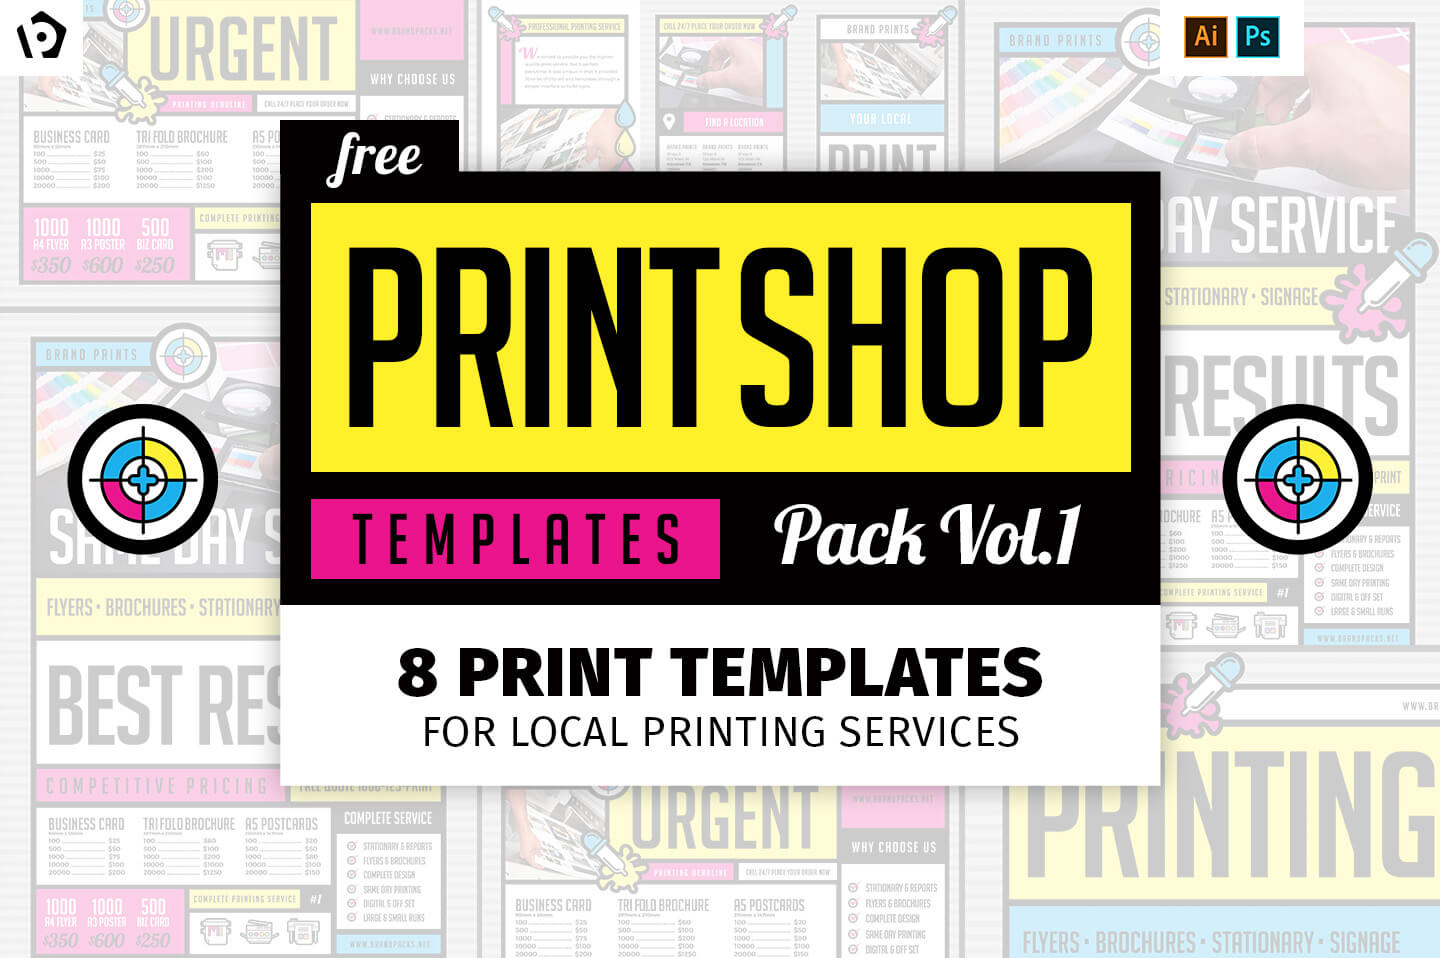 Free Print Shop Templates For Local Printing Services With Free Templates For Cards Print